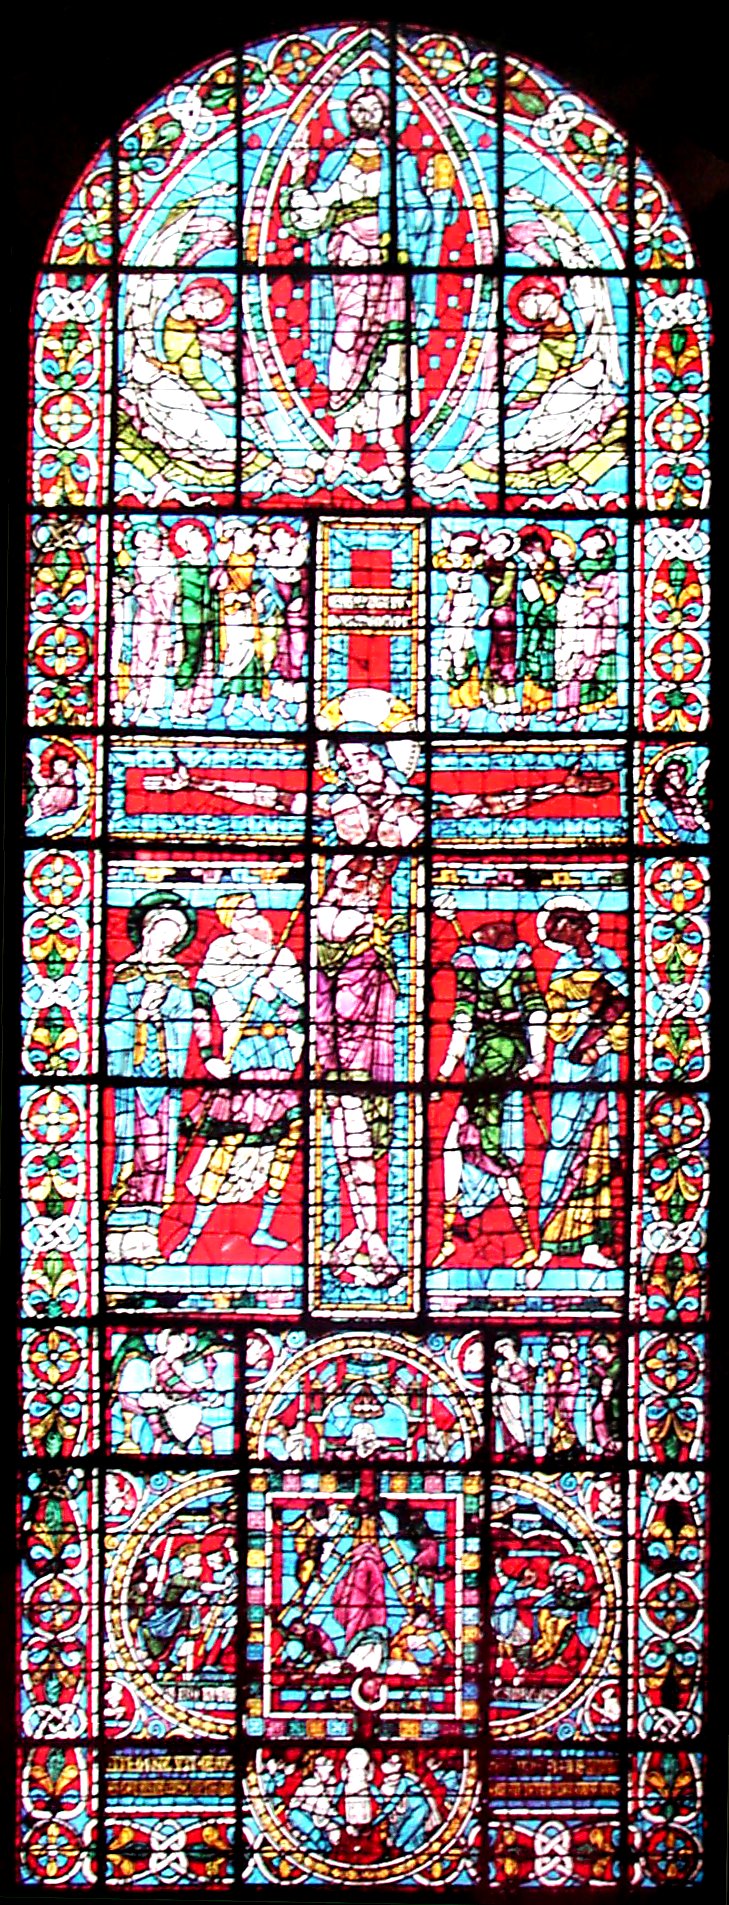 Window of the crucifixion in St Peter's Cathedral, Poitiers. image © abelard.org, 2004